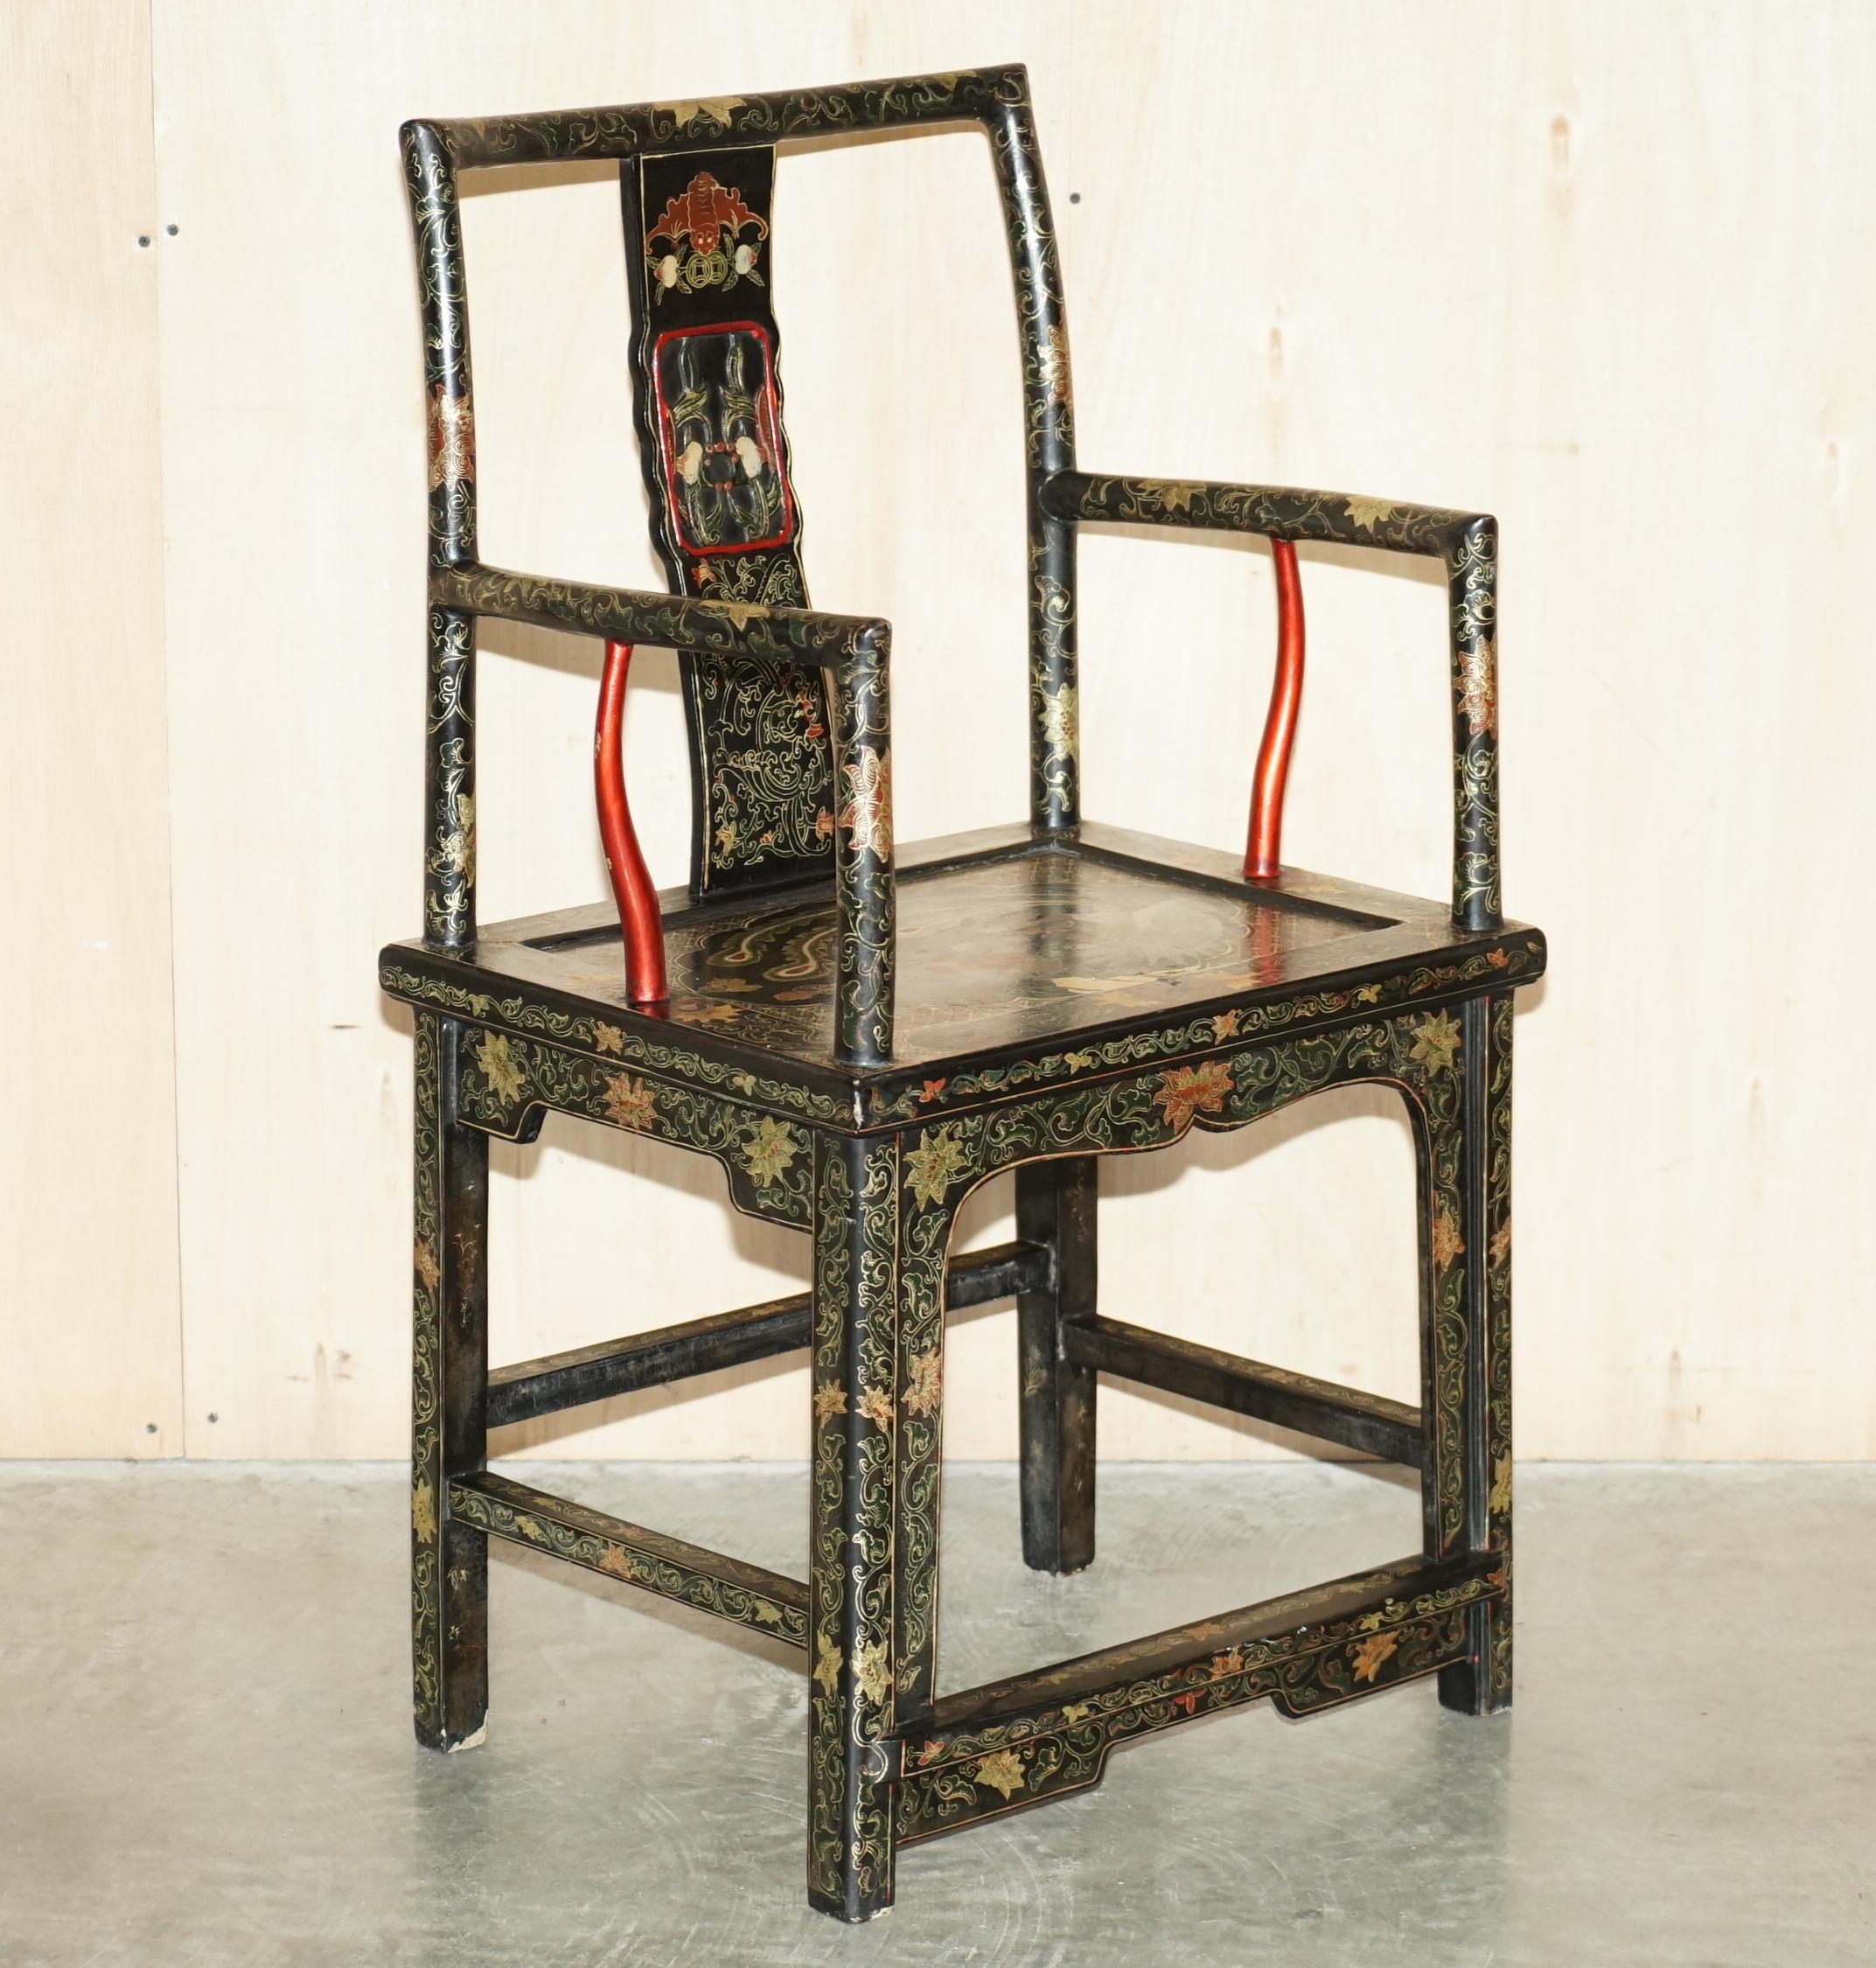 We are delighted to offer for sale this stunning pair of highly decorative Chinese Export circa 1900-1920 hand painted and lacquered Ming style armchairs

I have three of these chairs in total, this pair with red detailing to the arms and then